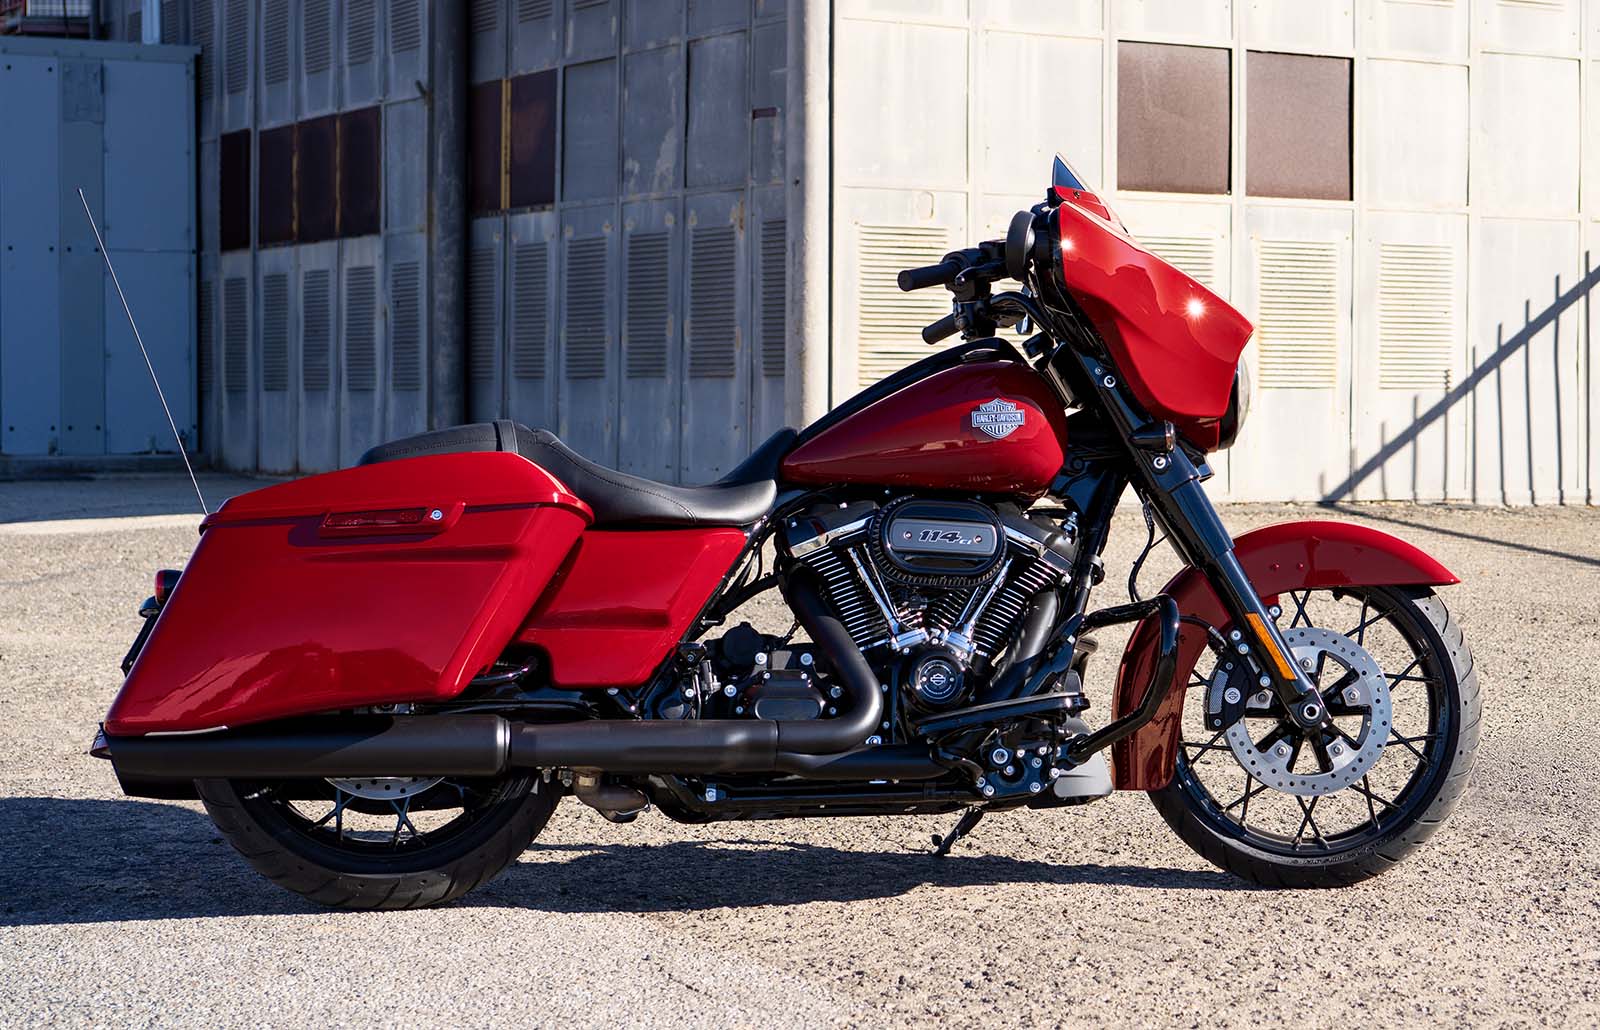 https://www.harley-davidson.com/content/dam/h-d/images/product-images/bikes/motorcycle/2022/2022-street-glide-special/key-features/2022-street-glide-special-motorcycle-k7.jpg?impolicy=myresize&rw=550